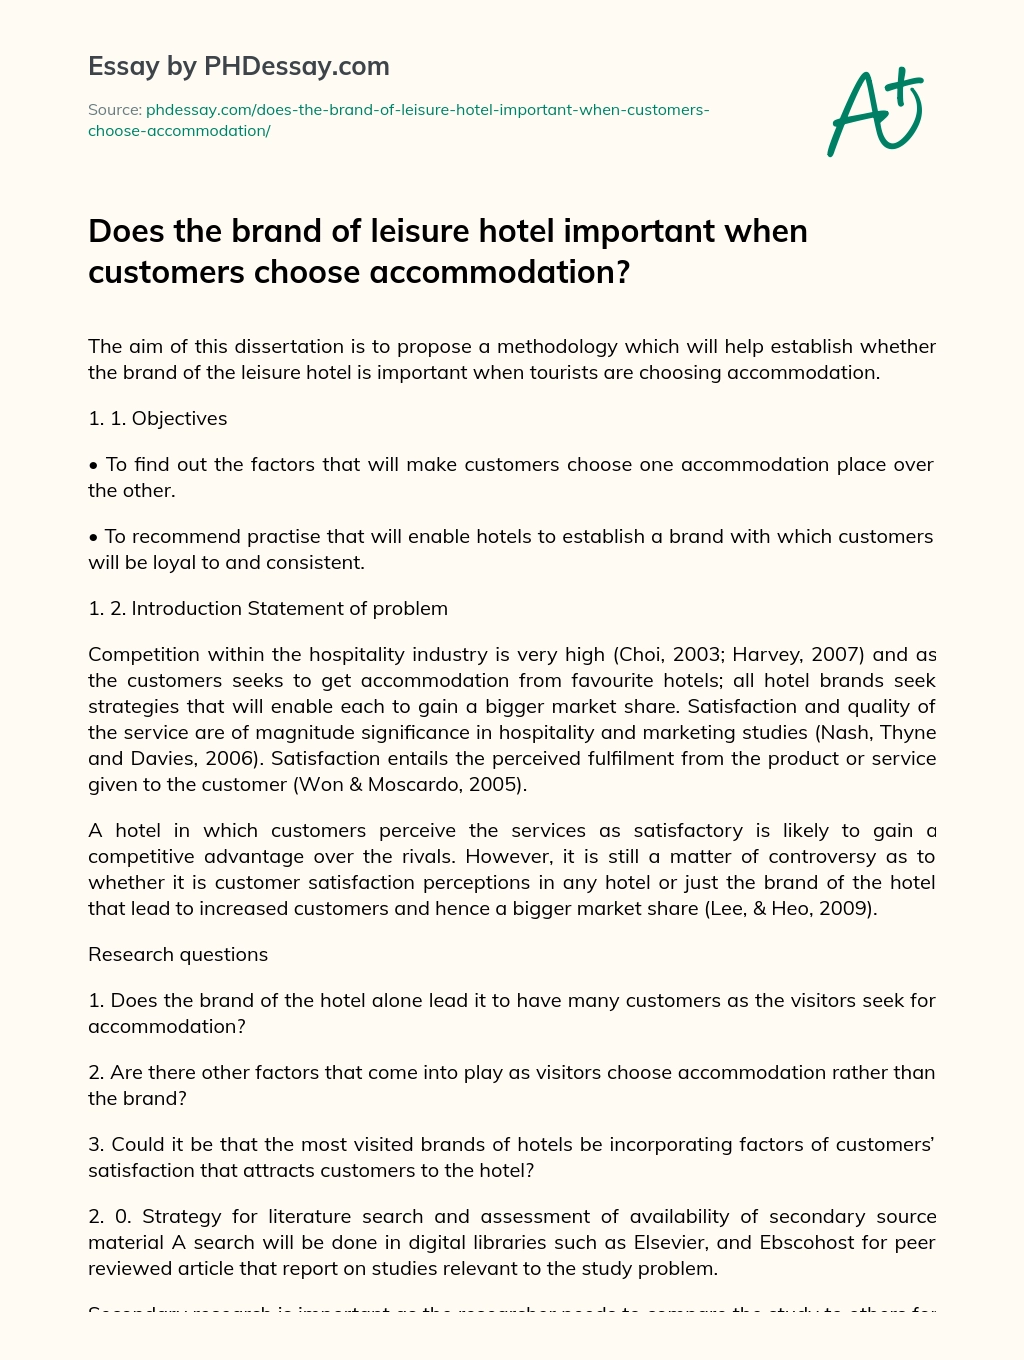 Does the brand of leisure hotel important when customers choose accommodation? essay